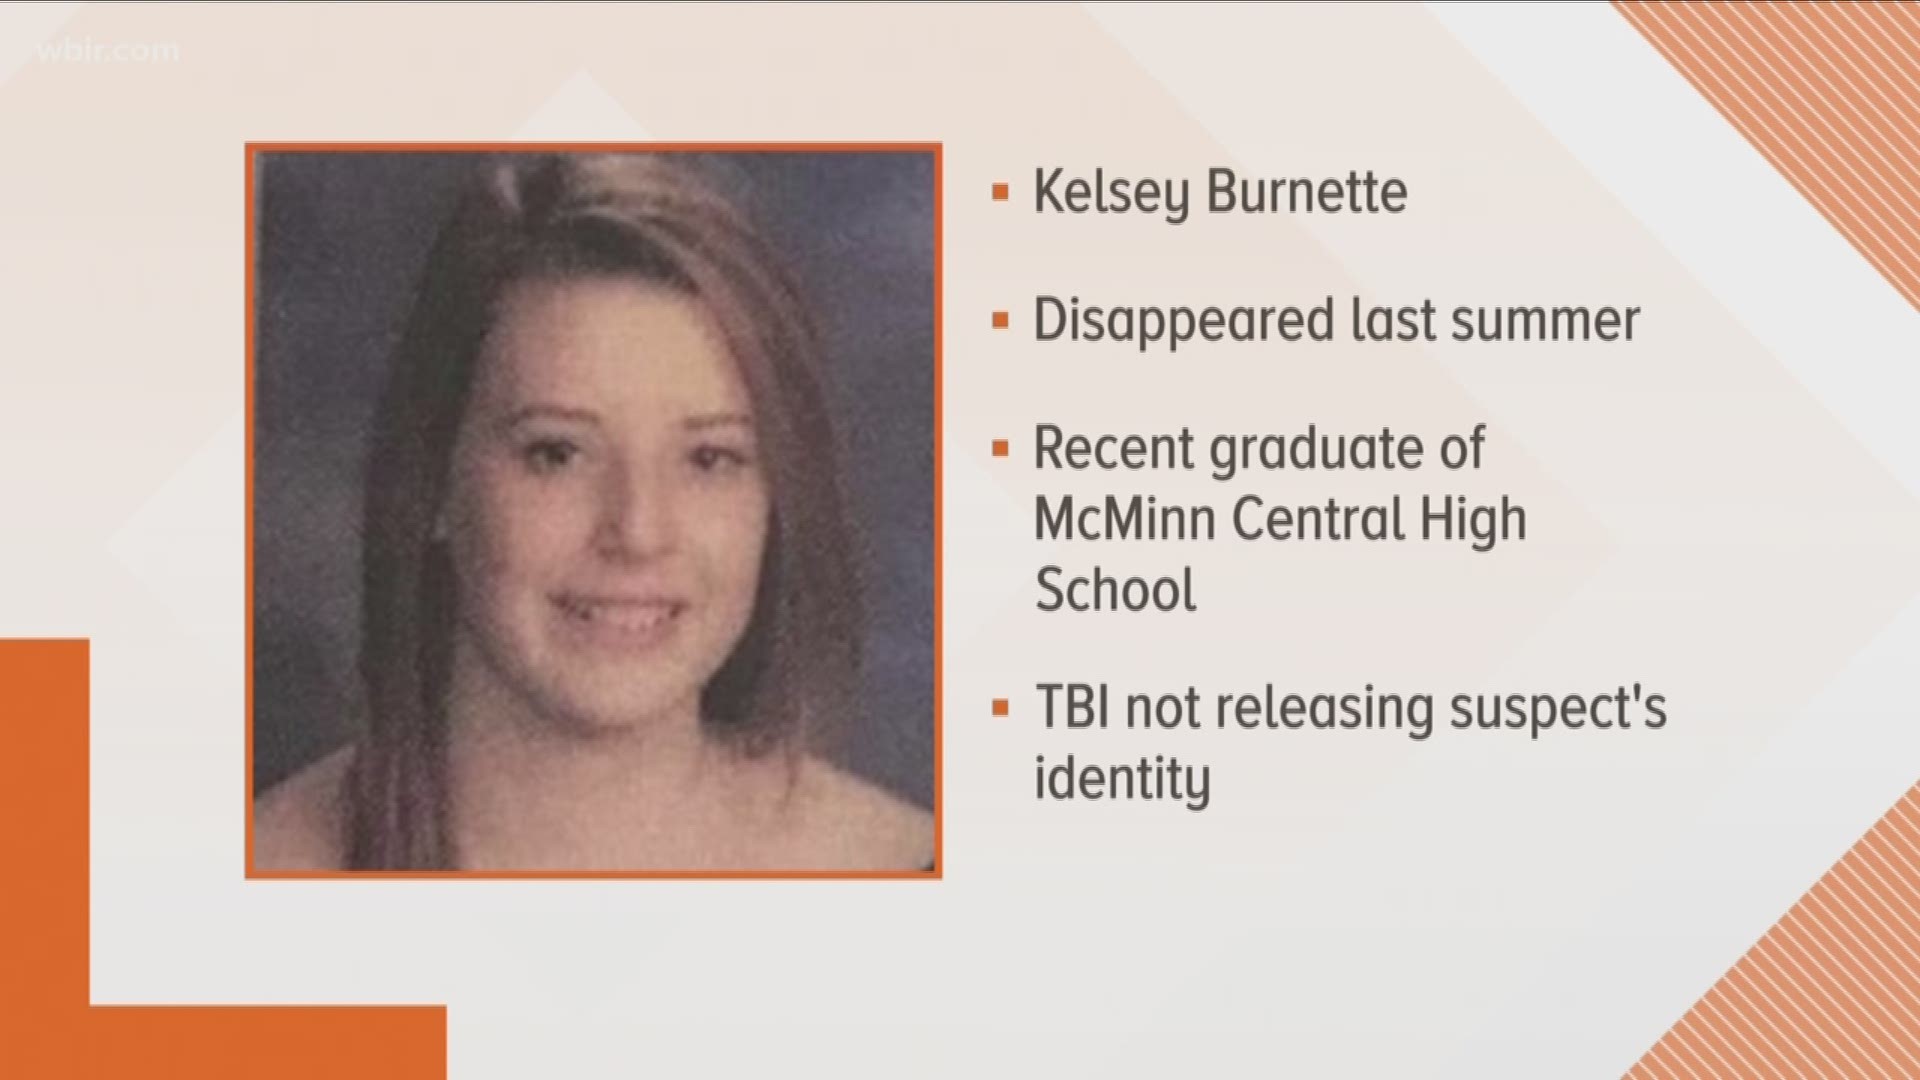 The TBI said the teen is being charged with Felony Murder and Aggravated Rape in the death of Kelsey Burnette.